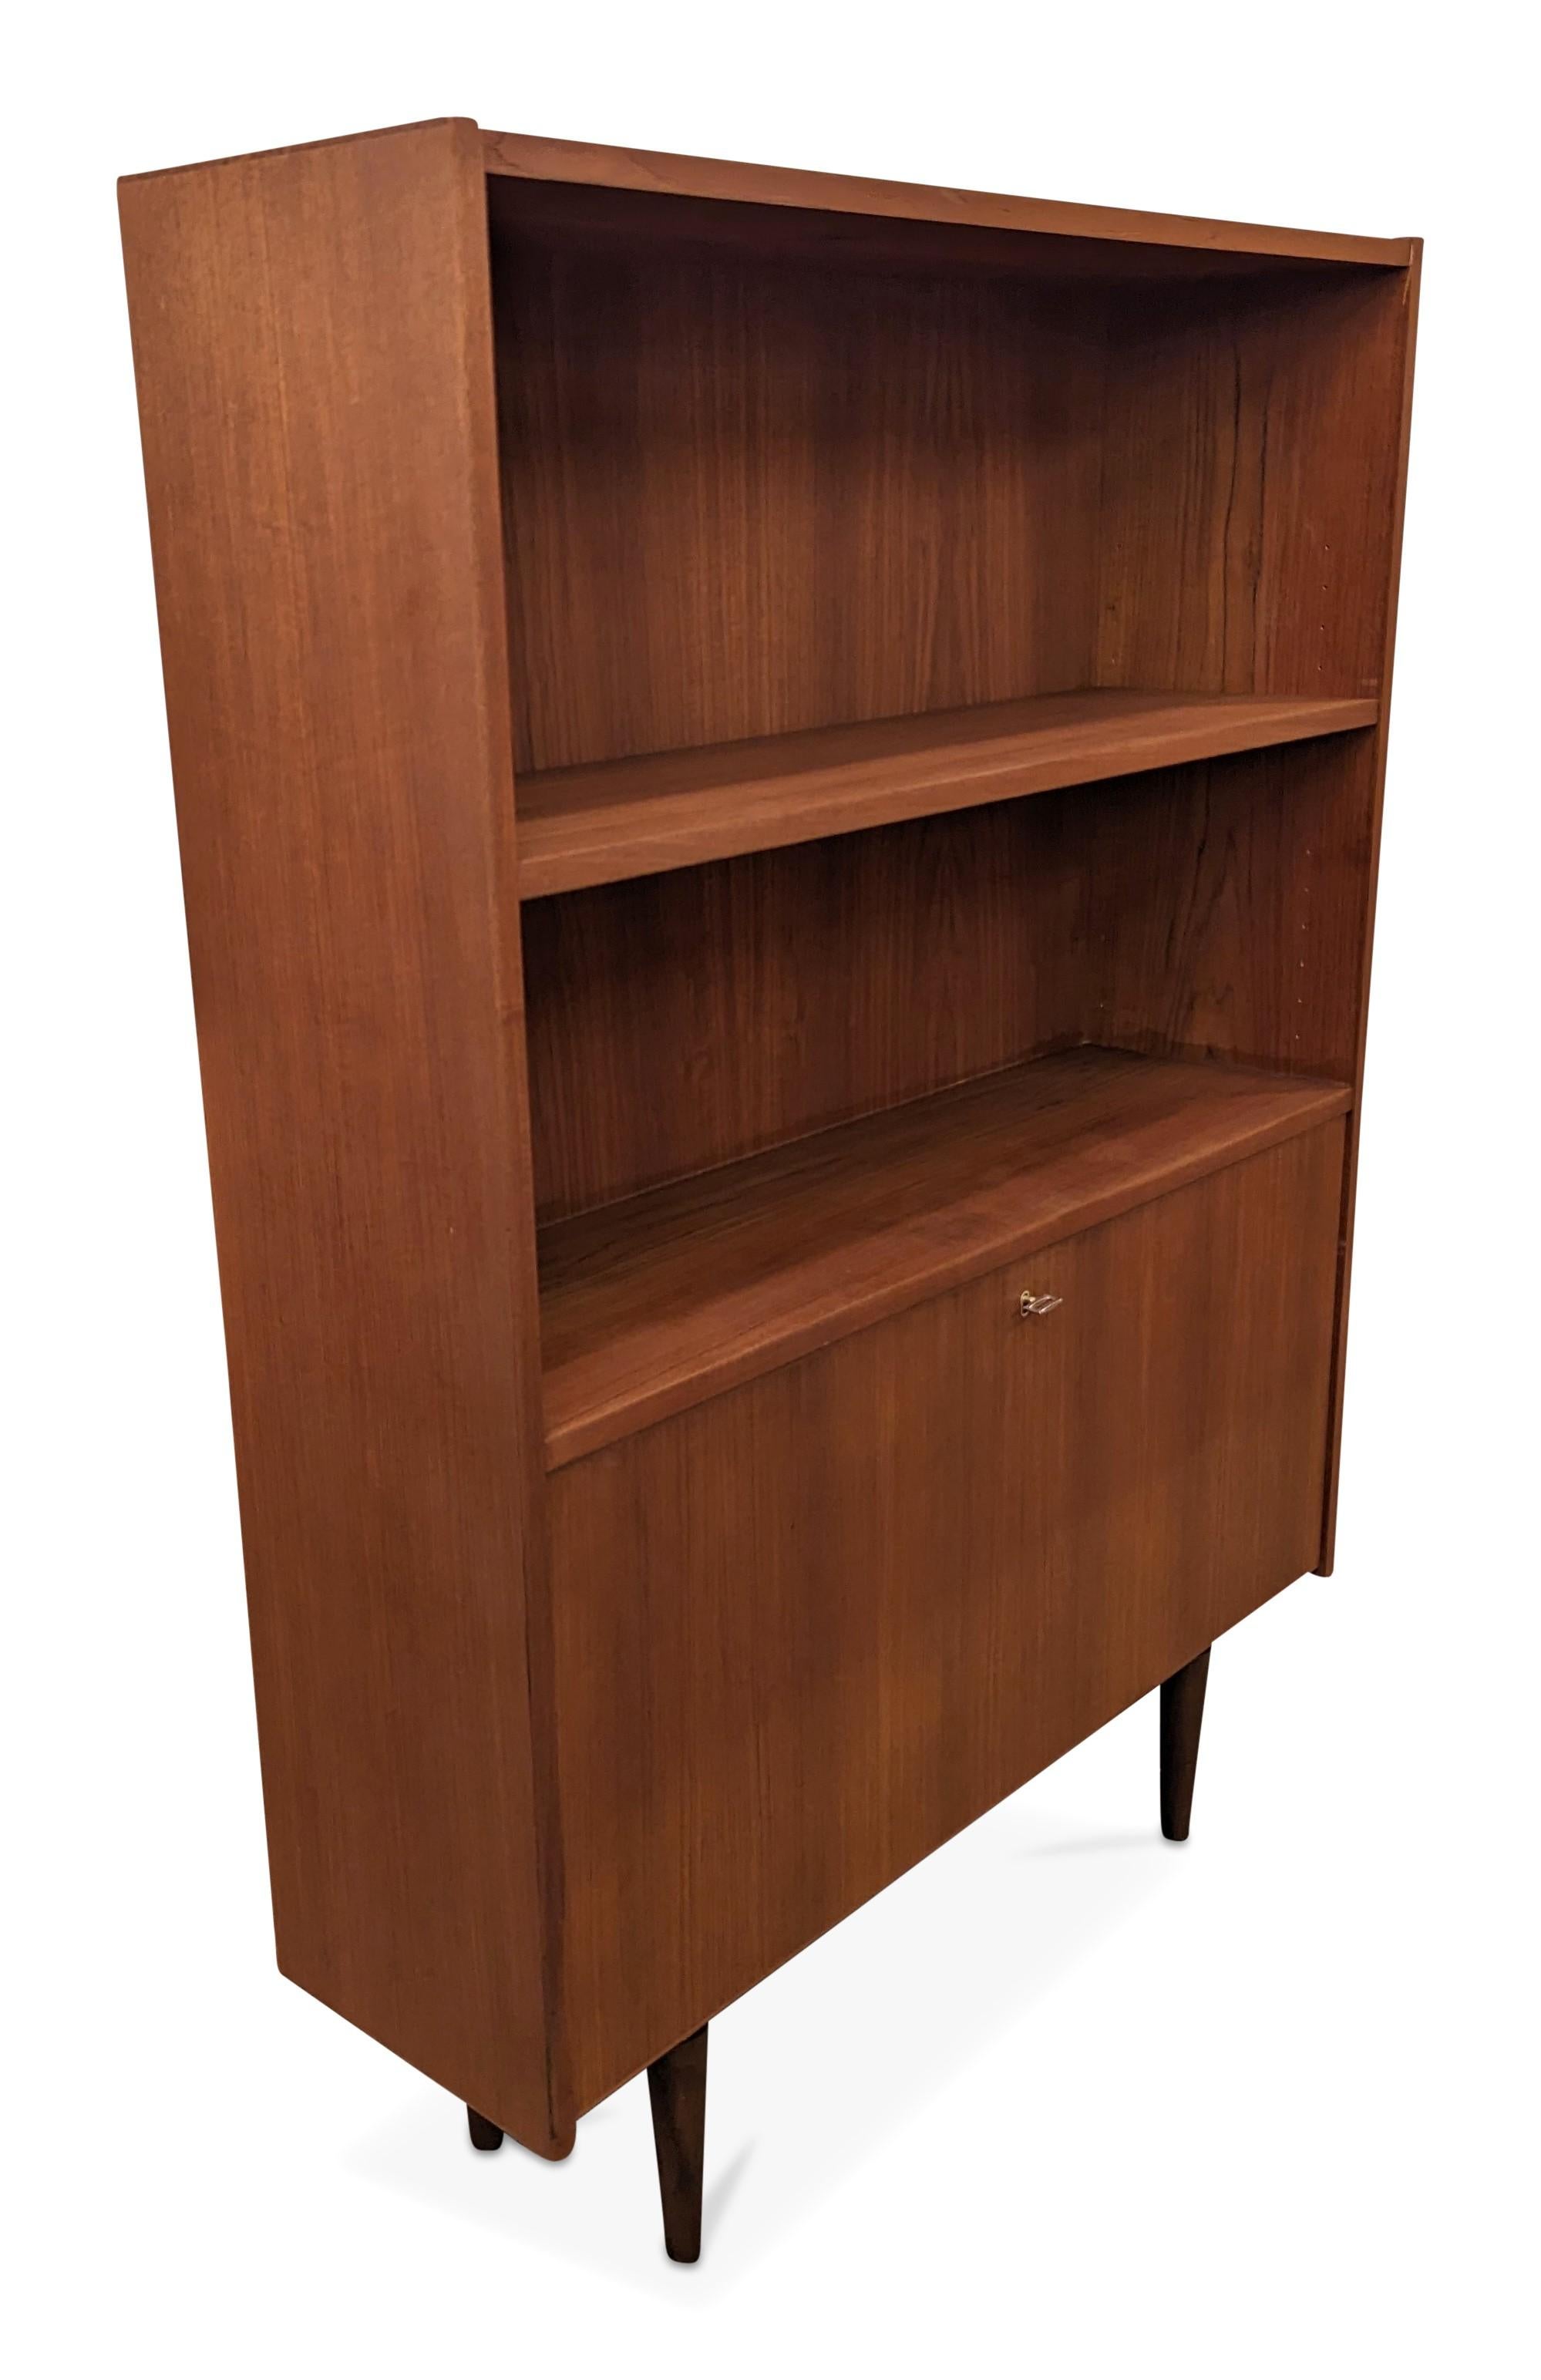 Vintage Danish mid-century modern, made in the 1950's - Recently refurbished

The piece is more than 65+ years old and some wear and tear can be expected, but we do everything we can to refurbish them in respect to the design.

There is a science